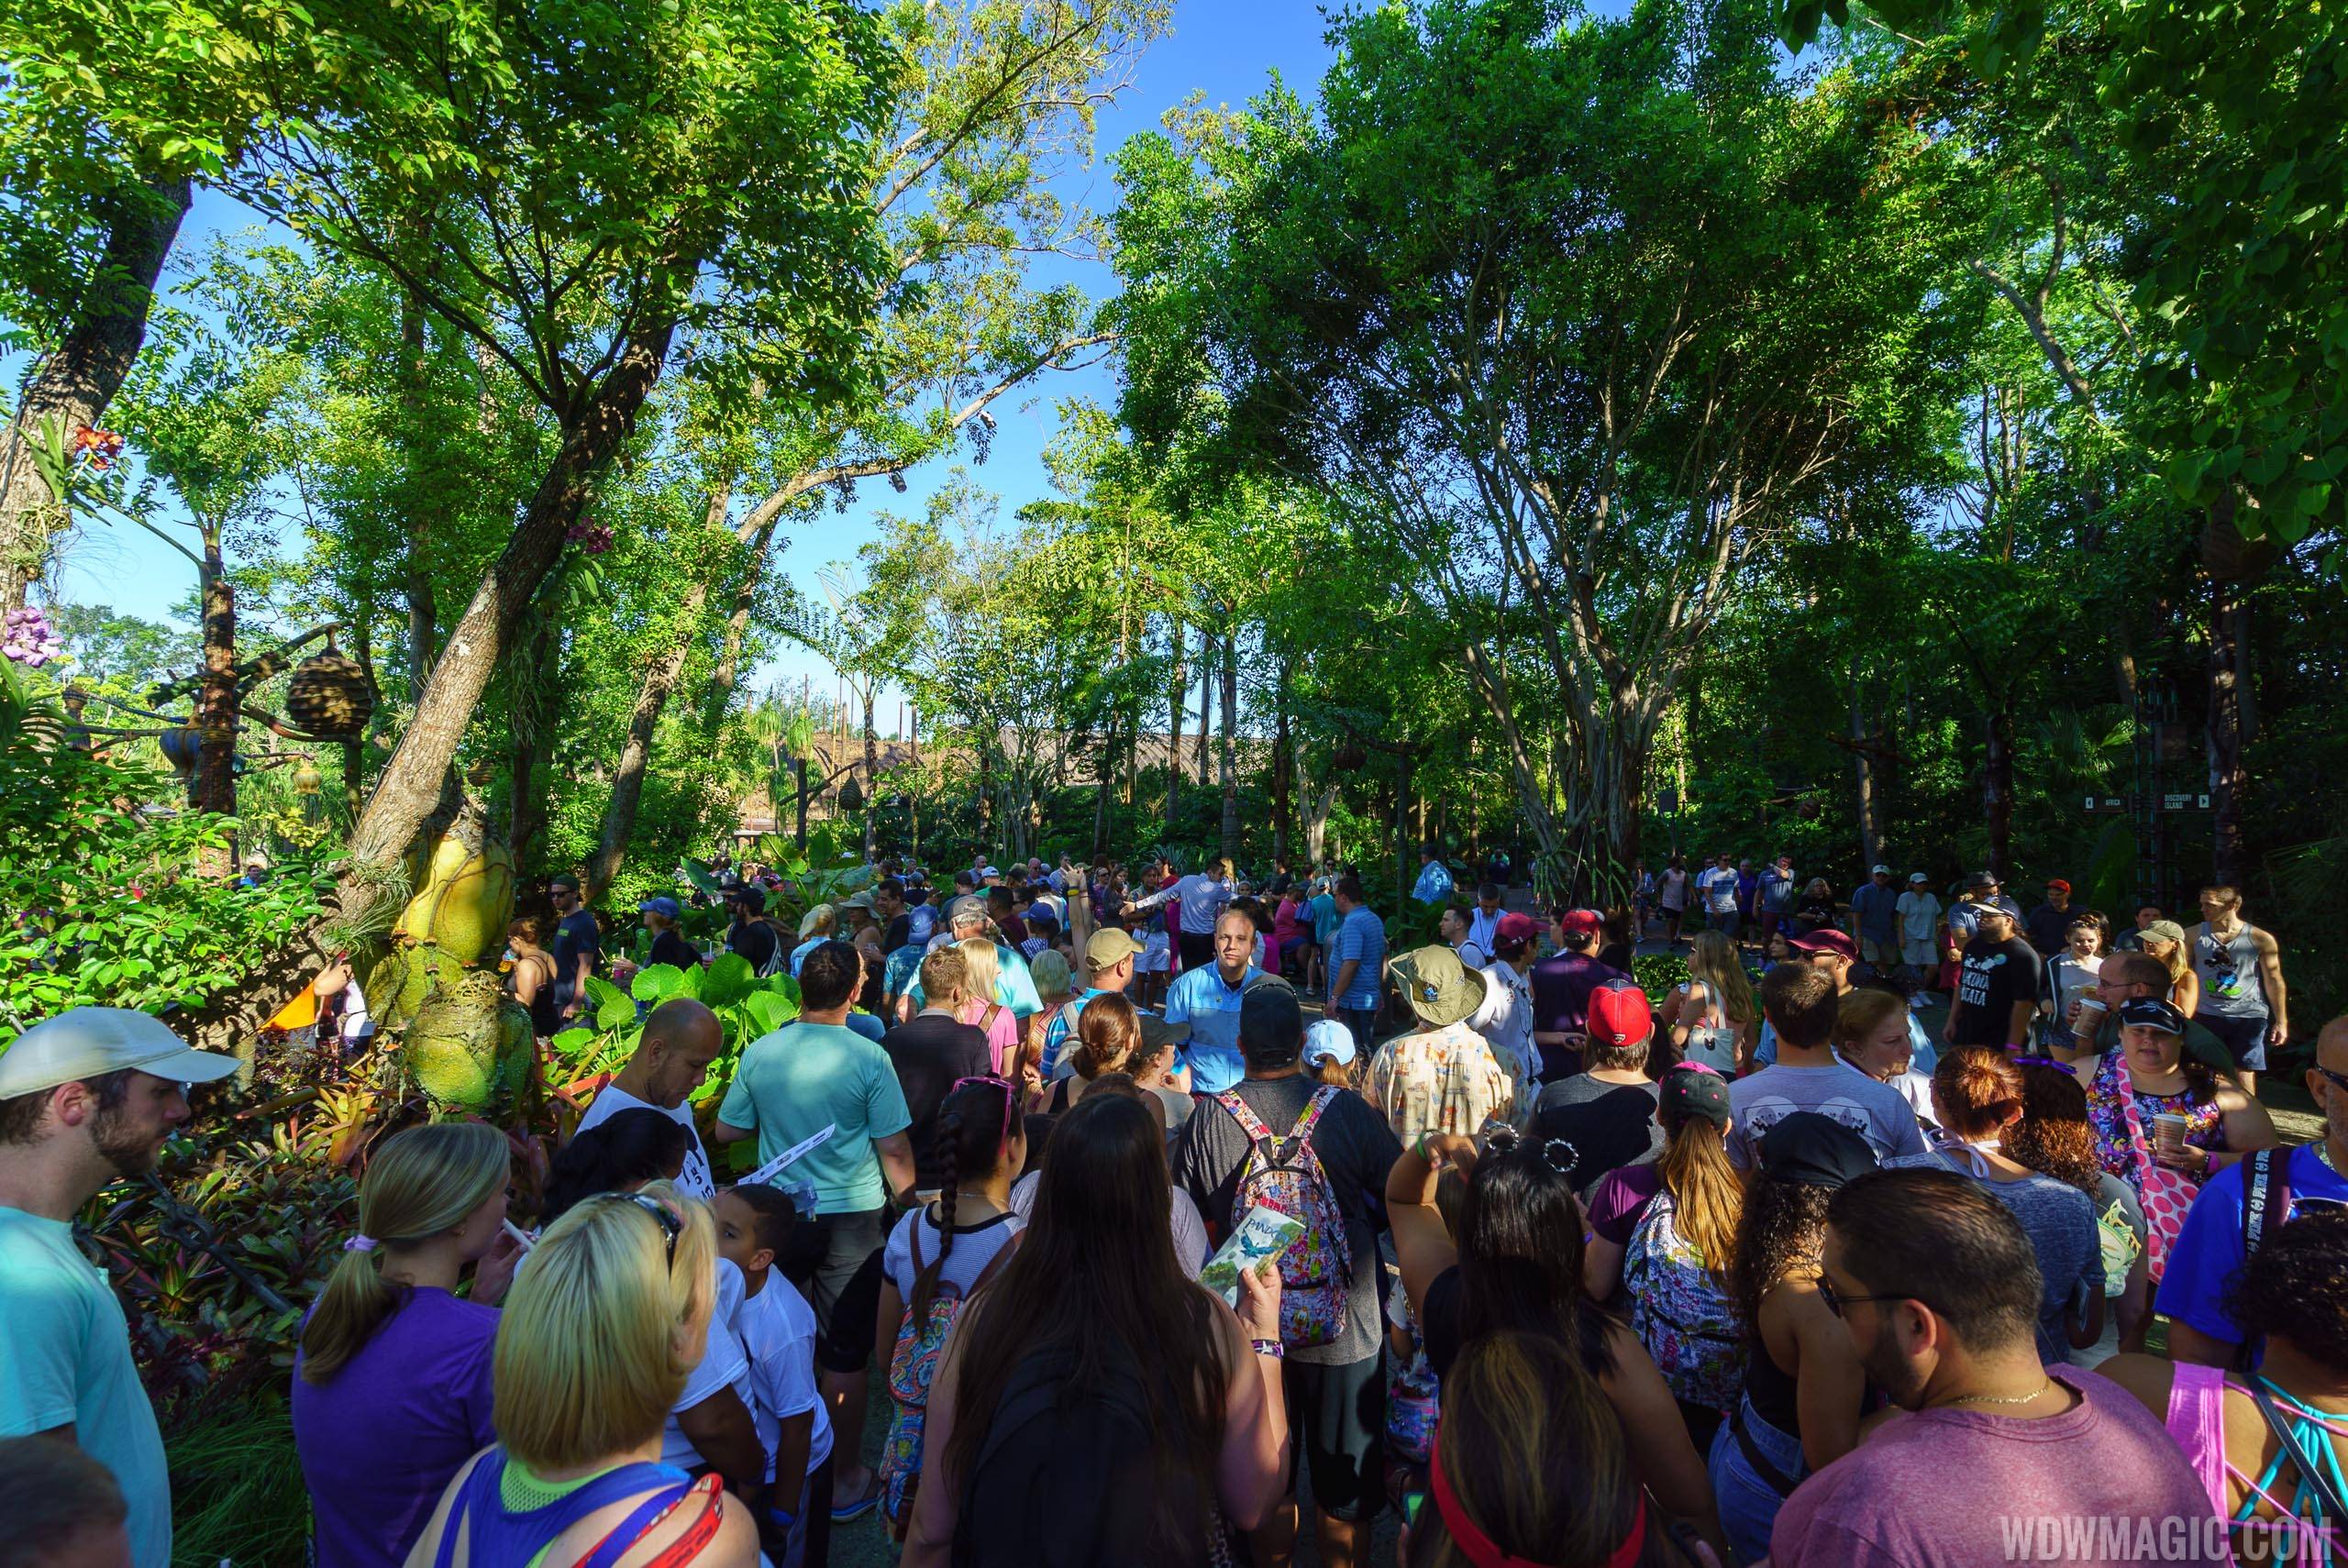 Opening day crowds at Pandora - The World of Avatar